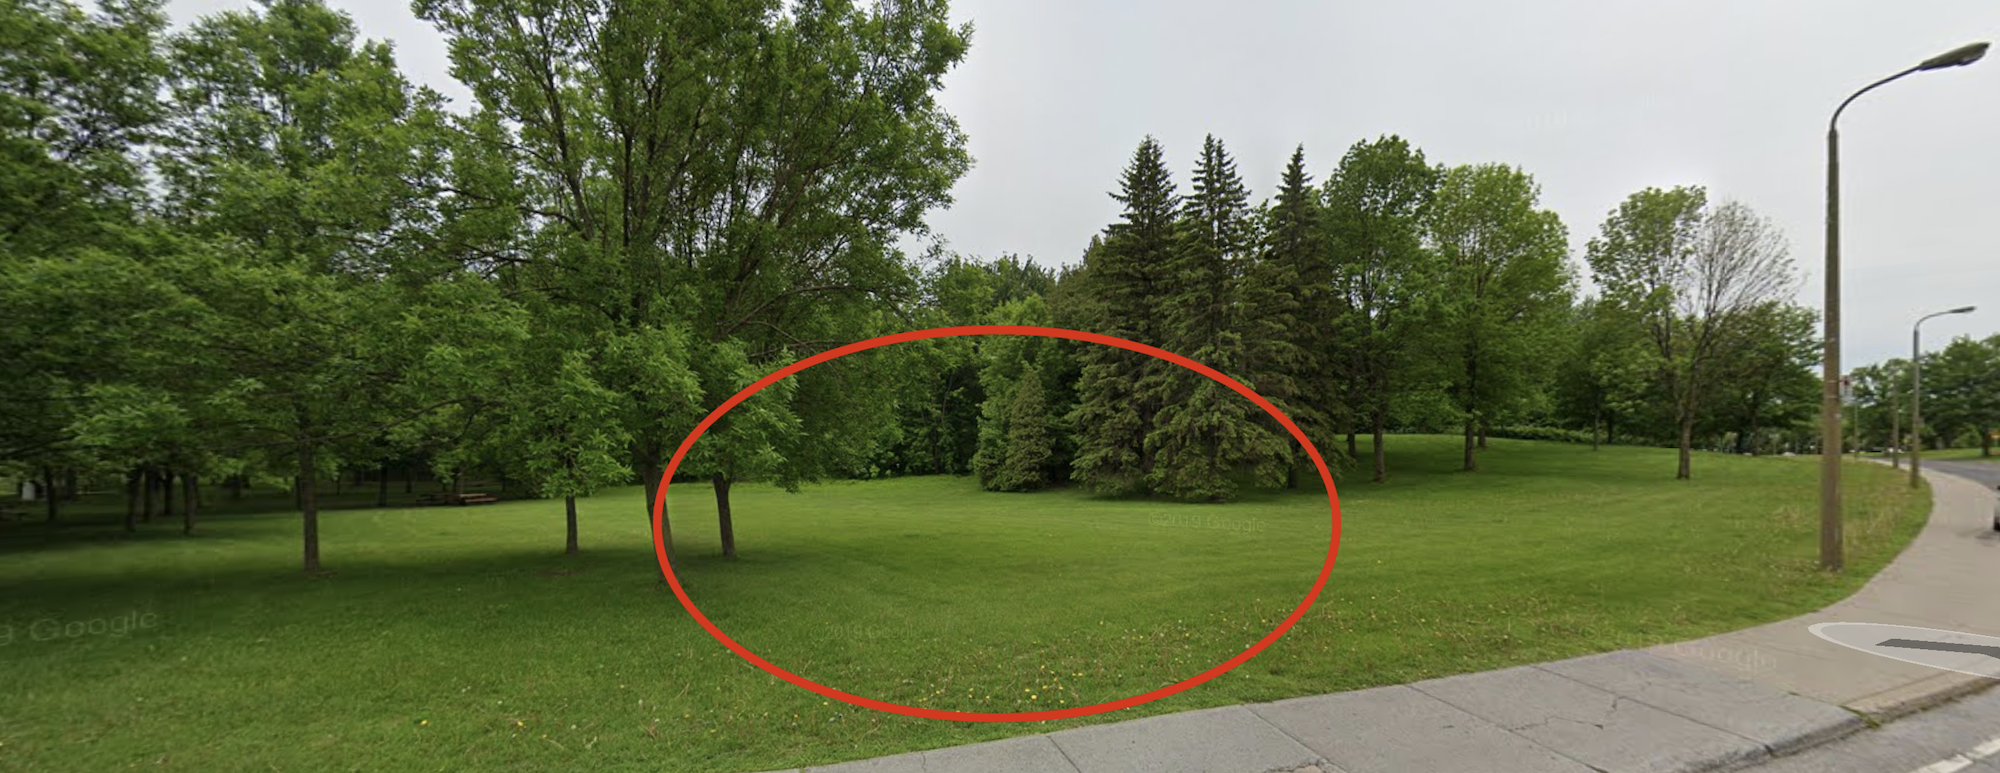 Google streetview of Mount Royal Park in Montreal, Quebec with a red drawn circle to indicate a possible location for a public art installation